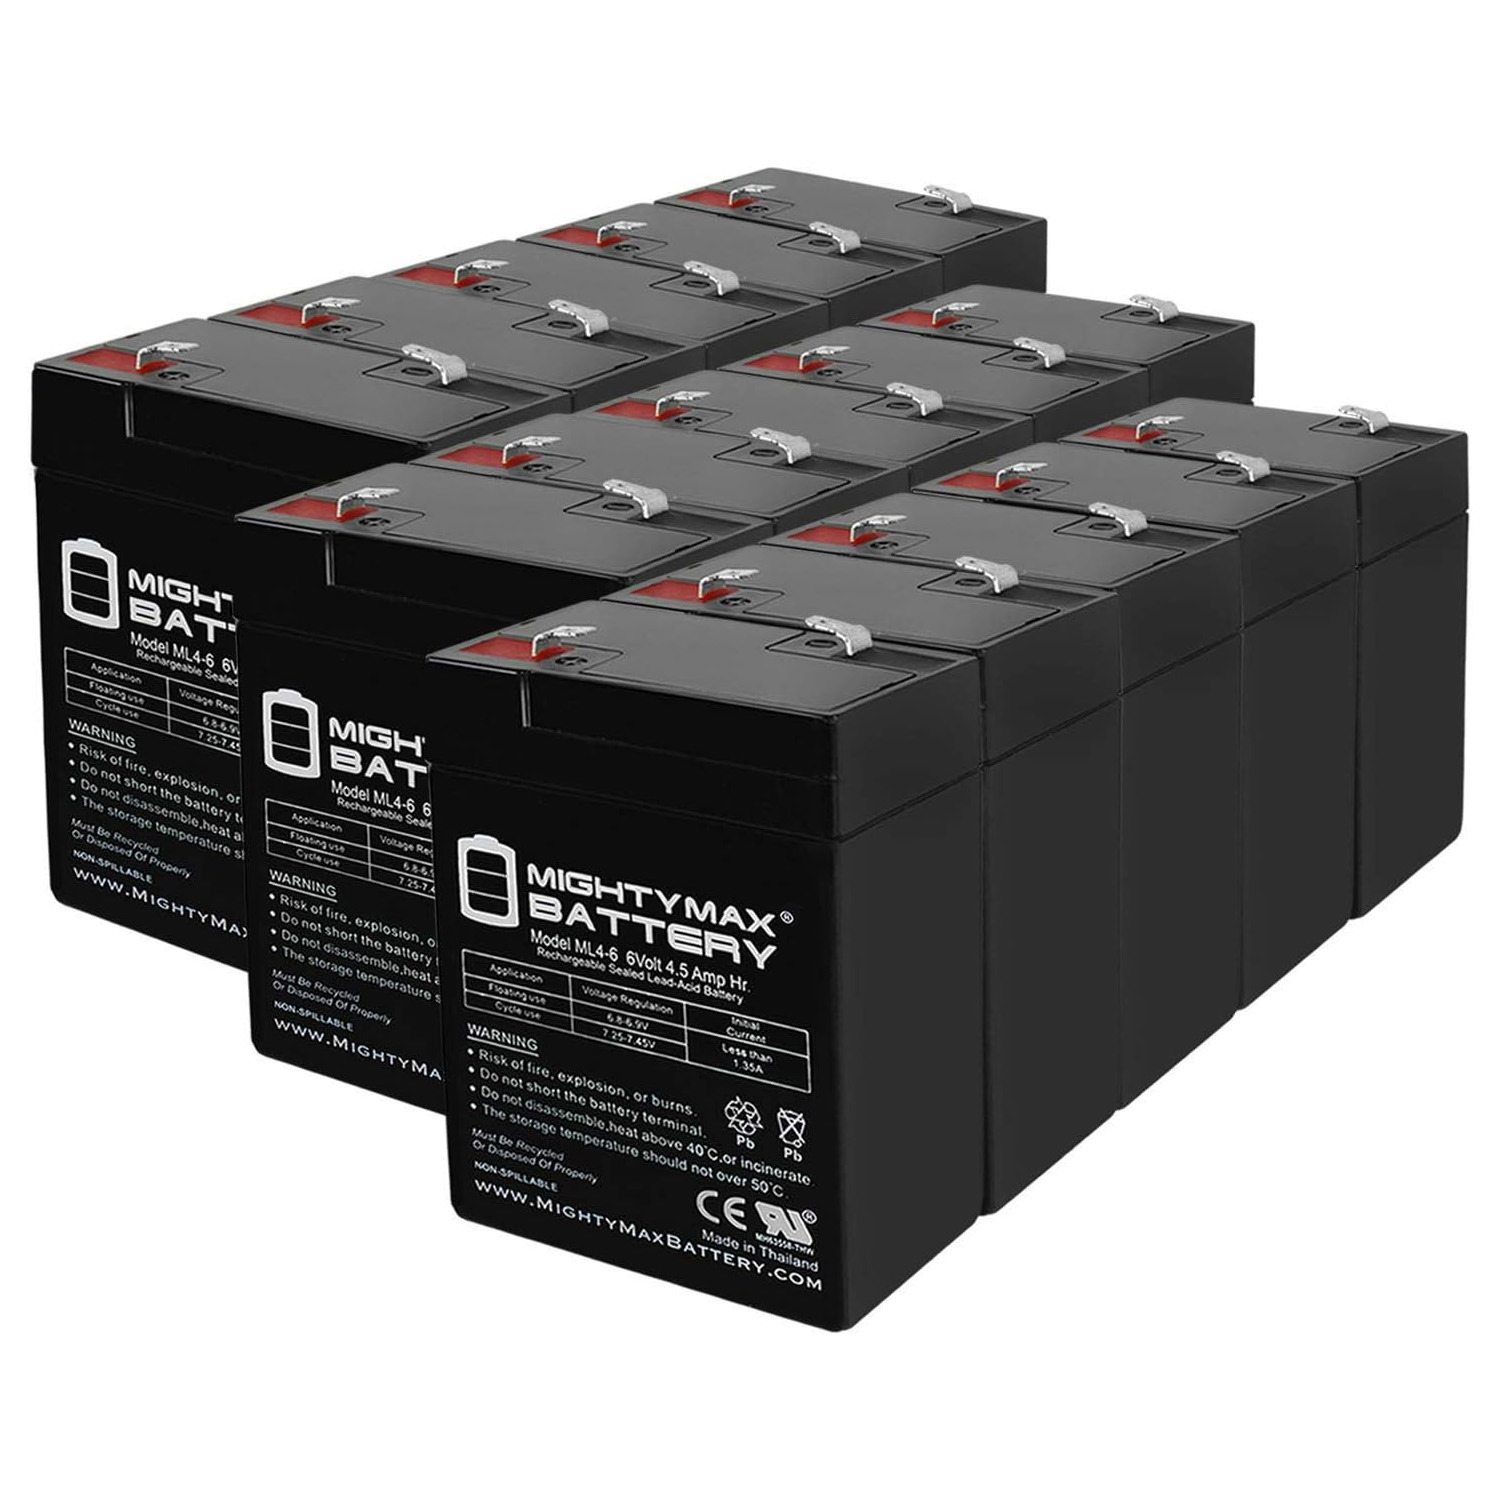 ML4-6 - 6V 4.5AH Replacement Battery for Diamex DM64 - 15 Pack